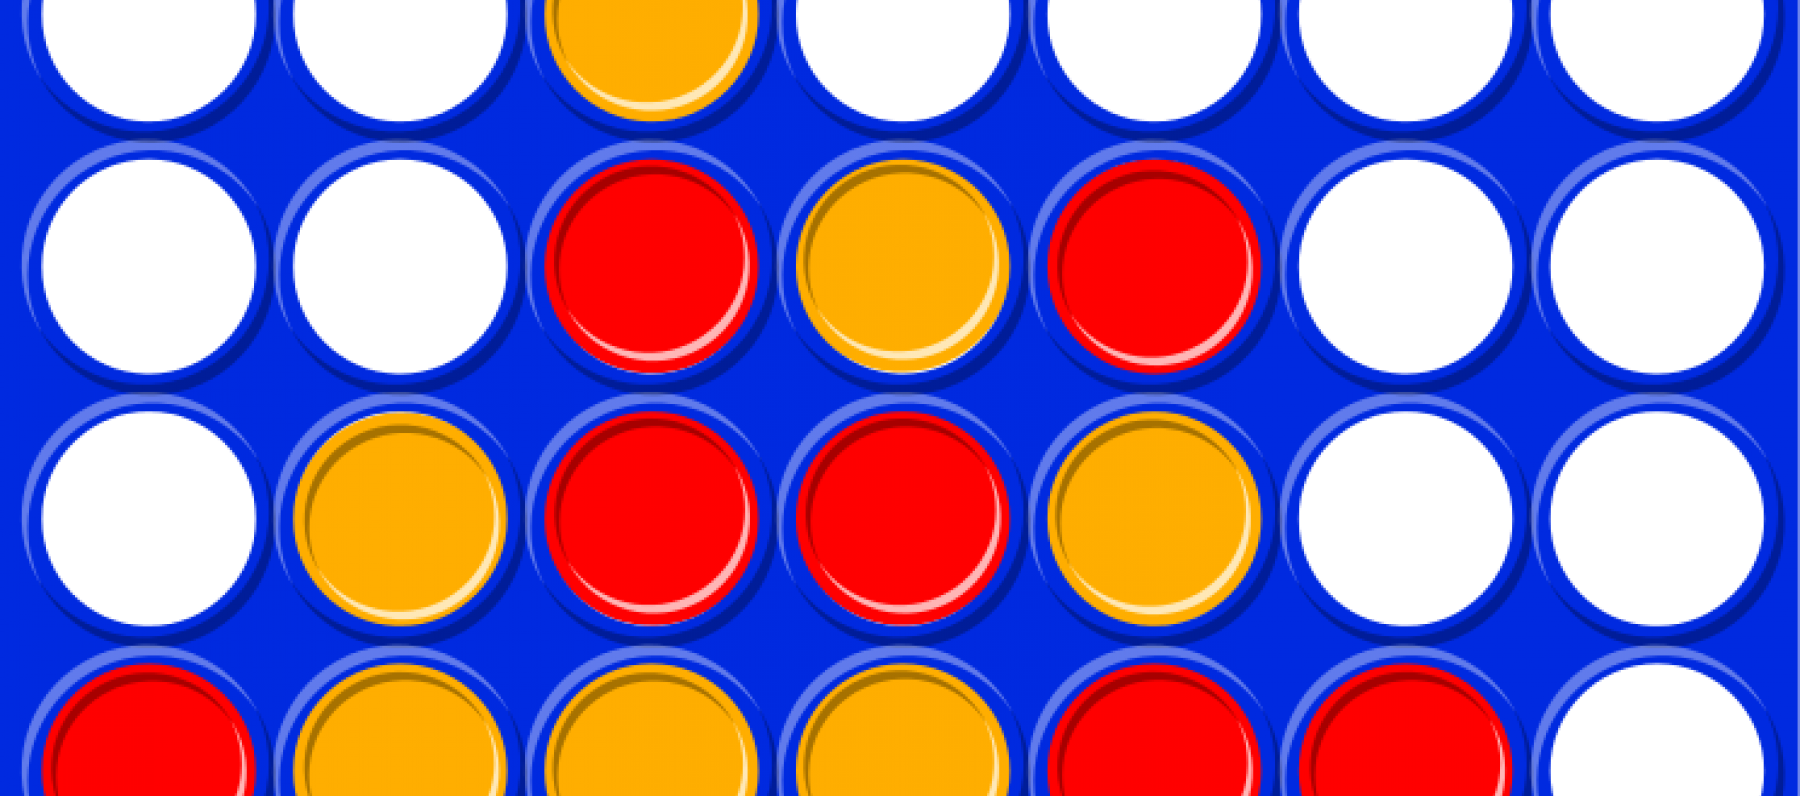 A connect four board game